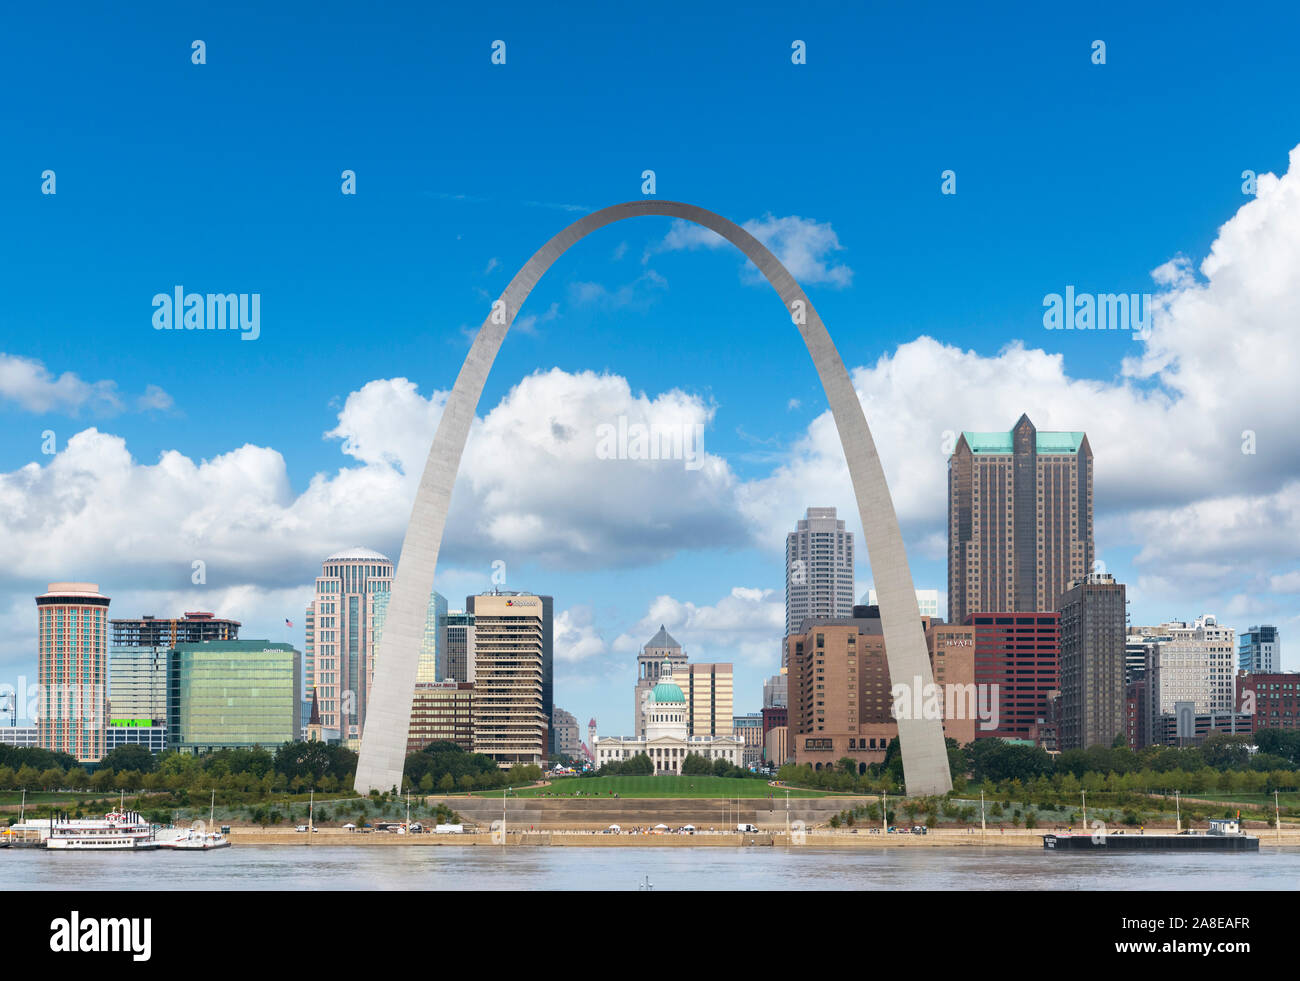 View of the St Louis skyline from across the Mississippi River with the Gateway Arch framing the Old Courthouse, St Louis, Missouri, USA Stock Photo